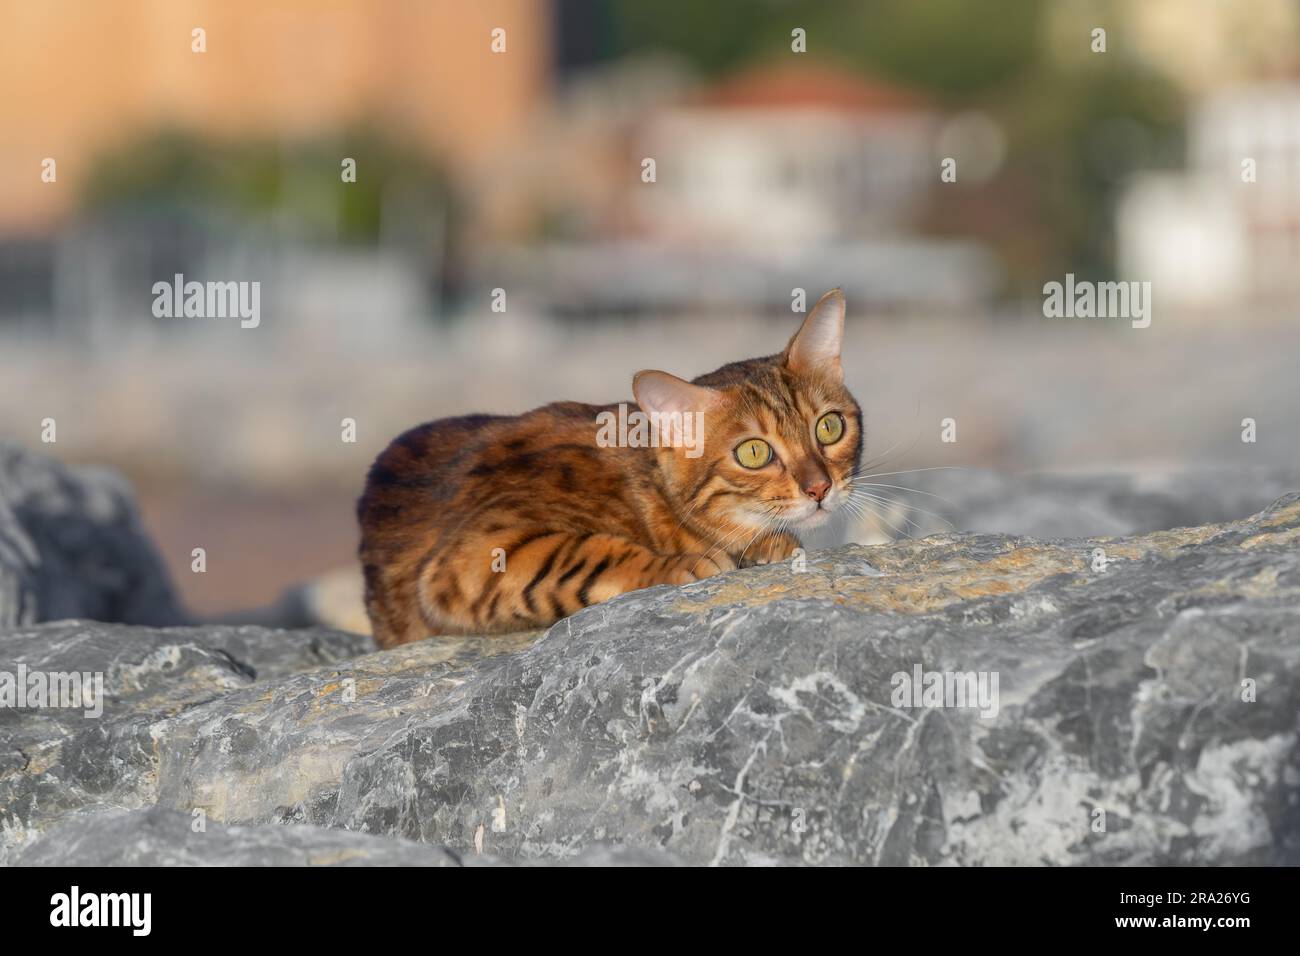 The Bengal cat tracks down its prey by hiding among the rocks. Domestic cat on the hunt. Stock Photo